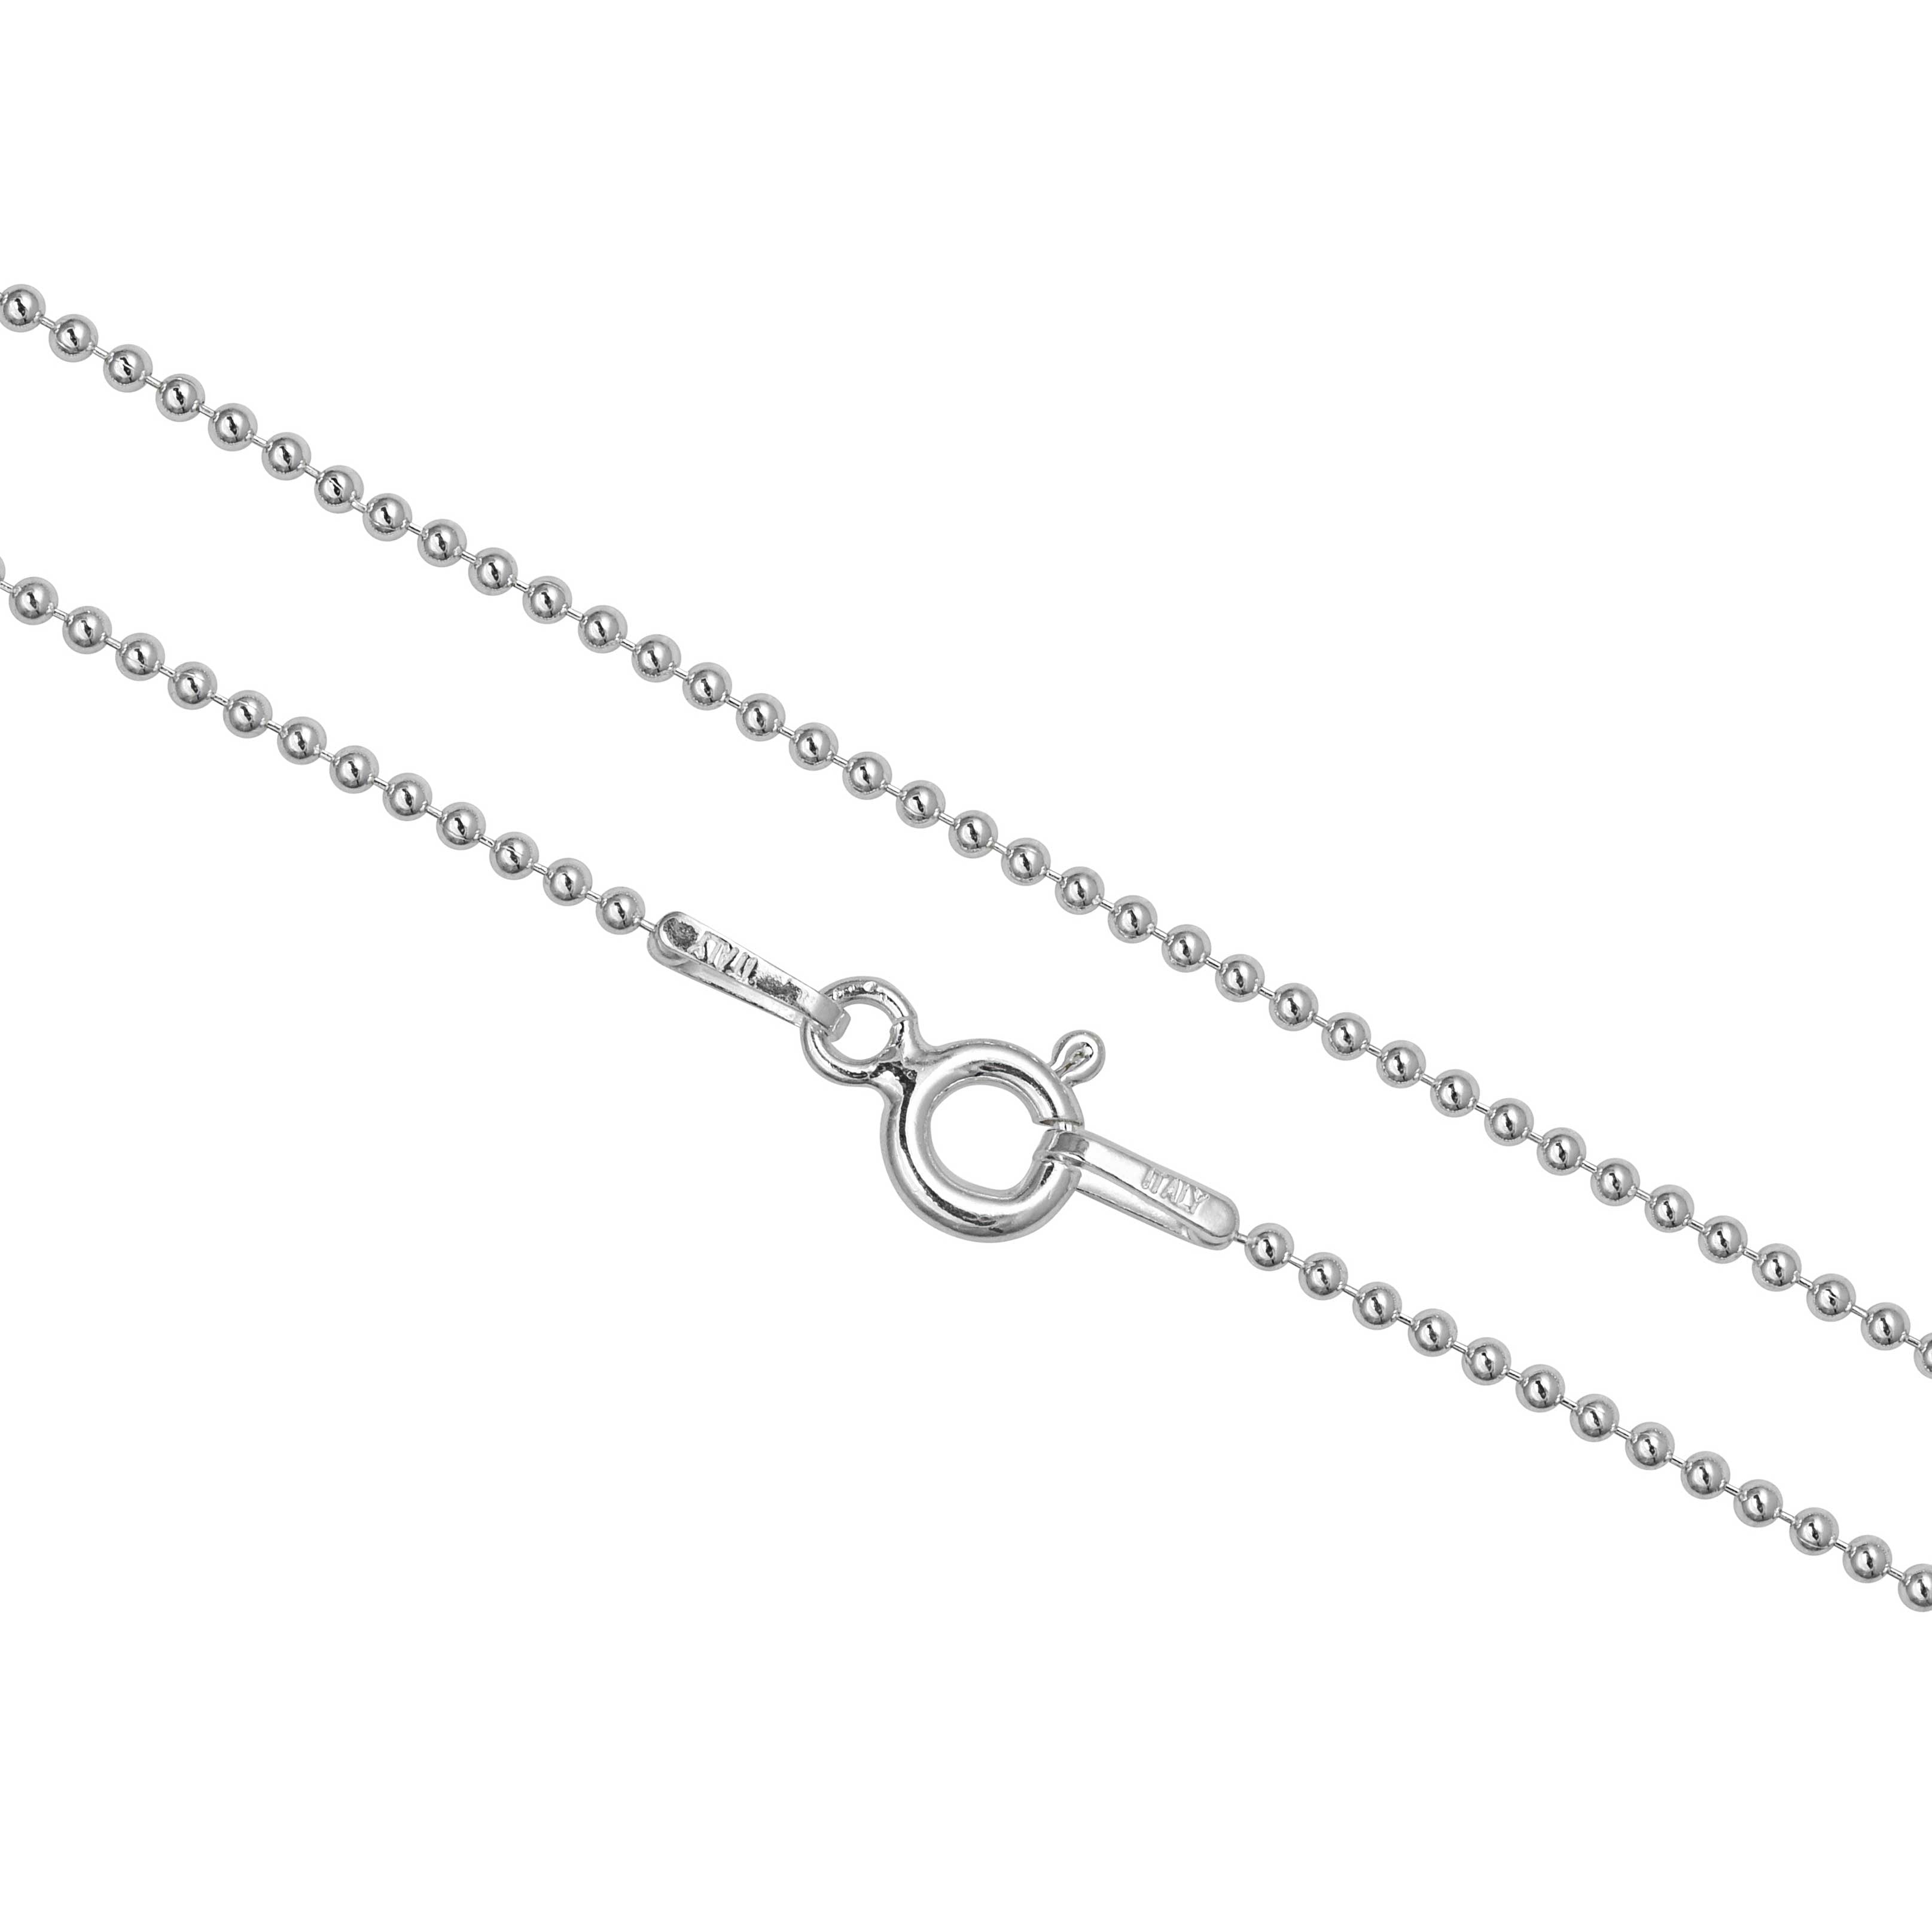 12 pcs 14" Sterling Silver 1.2mm BALL BEAD CHAINS Girls 